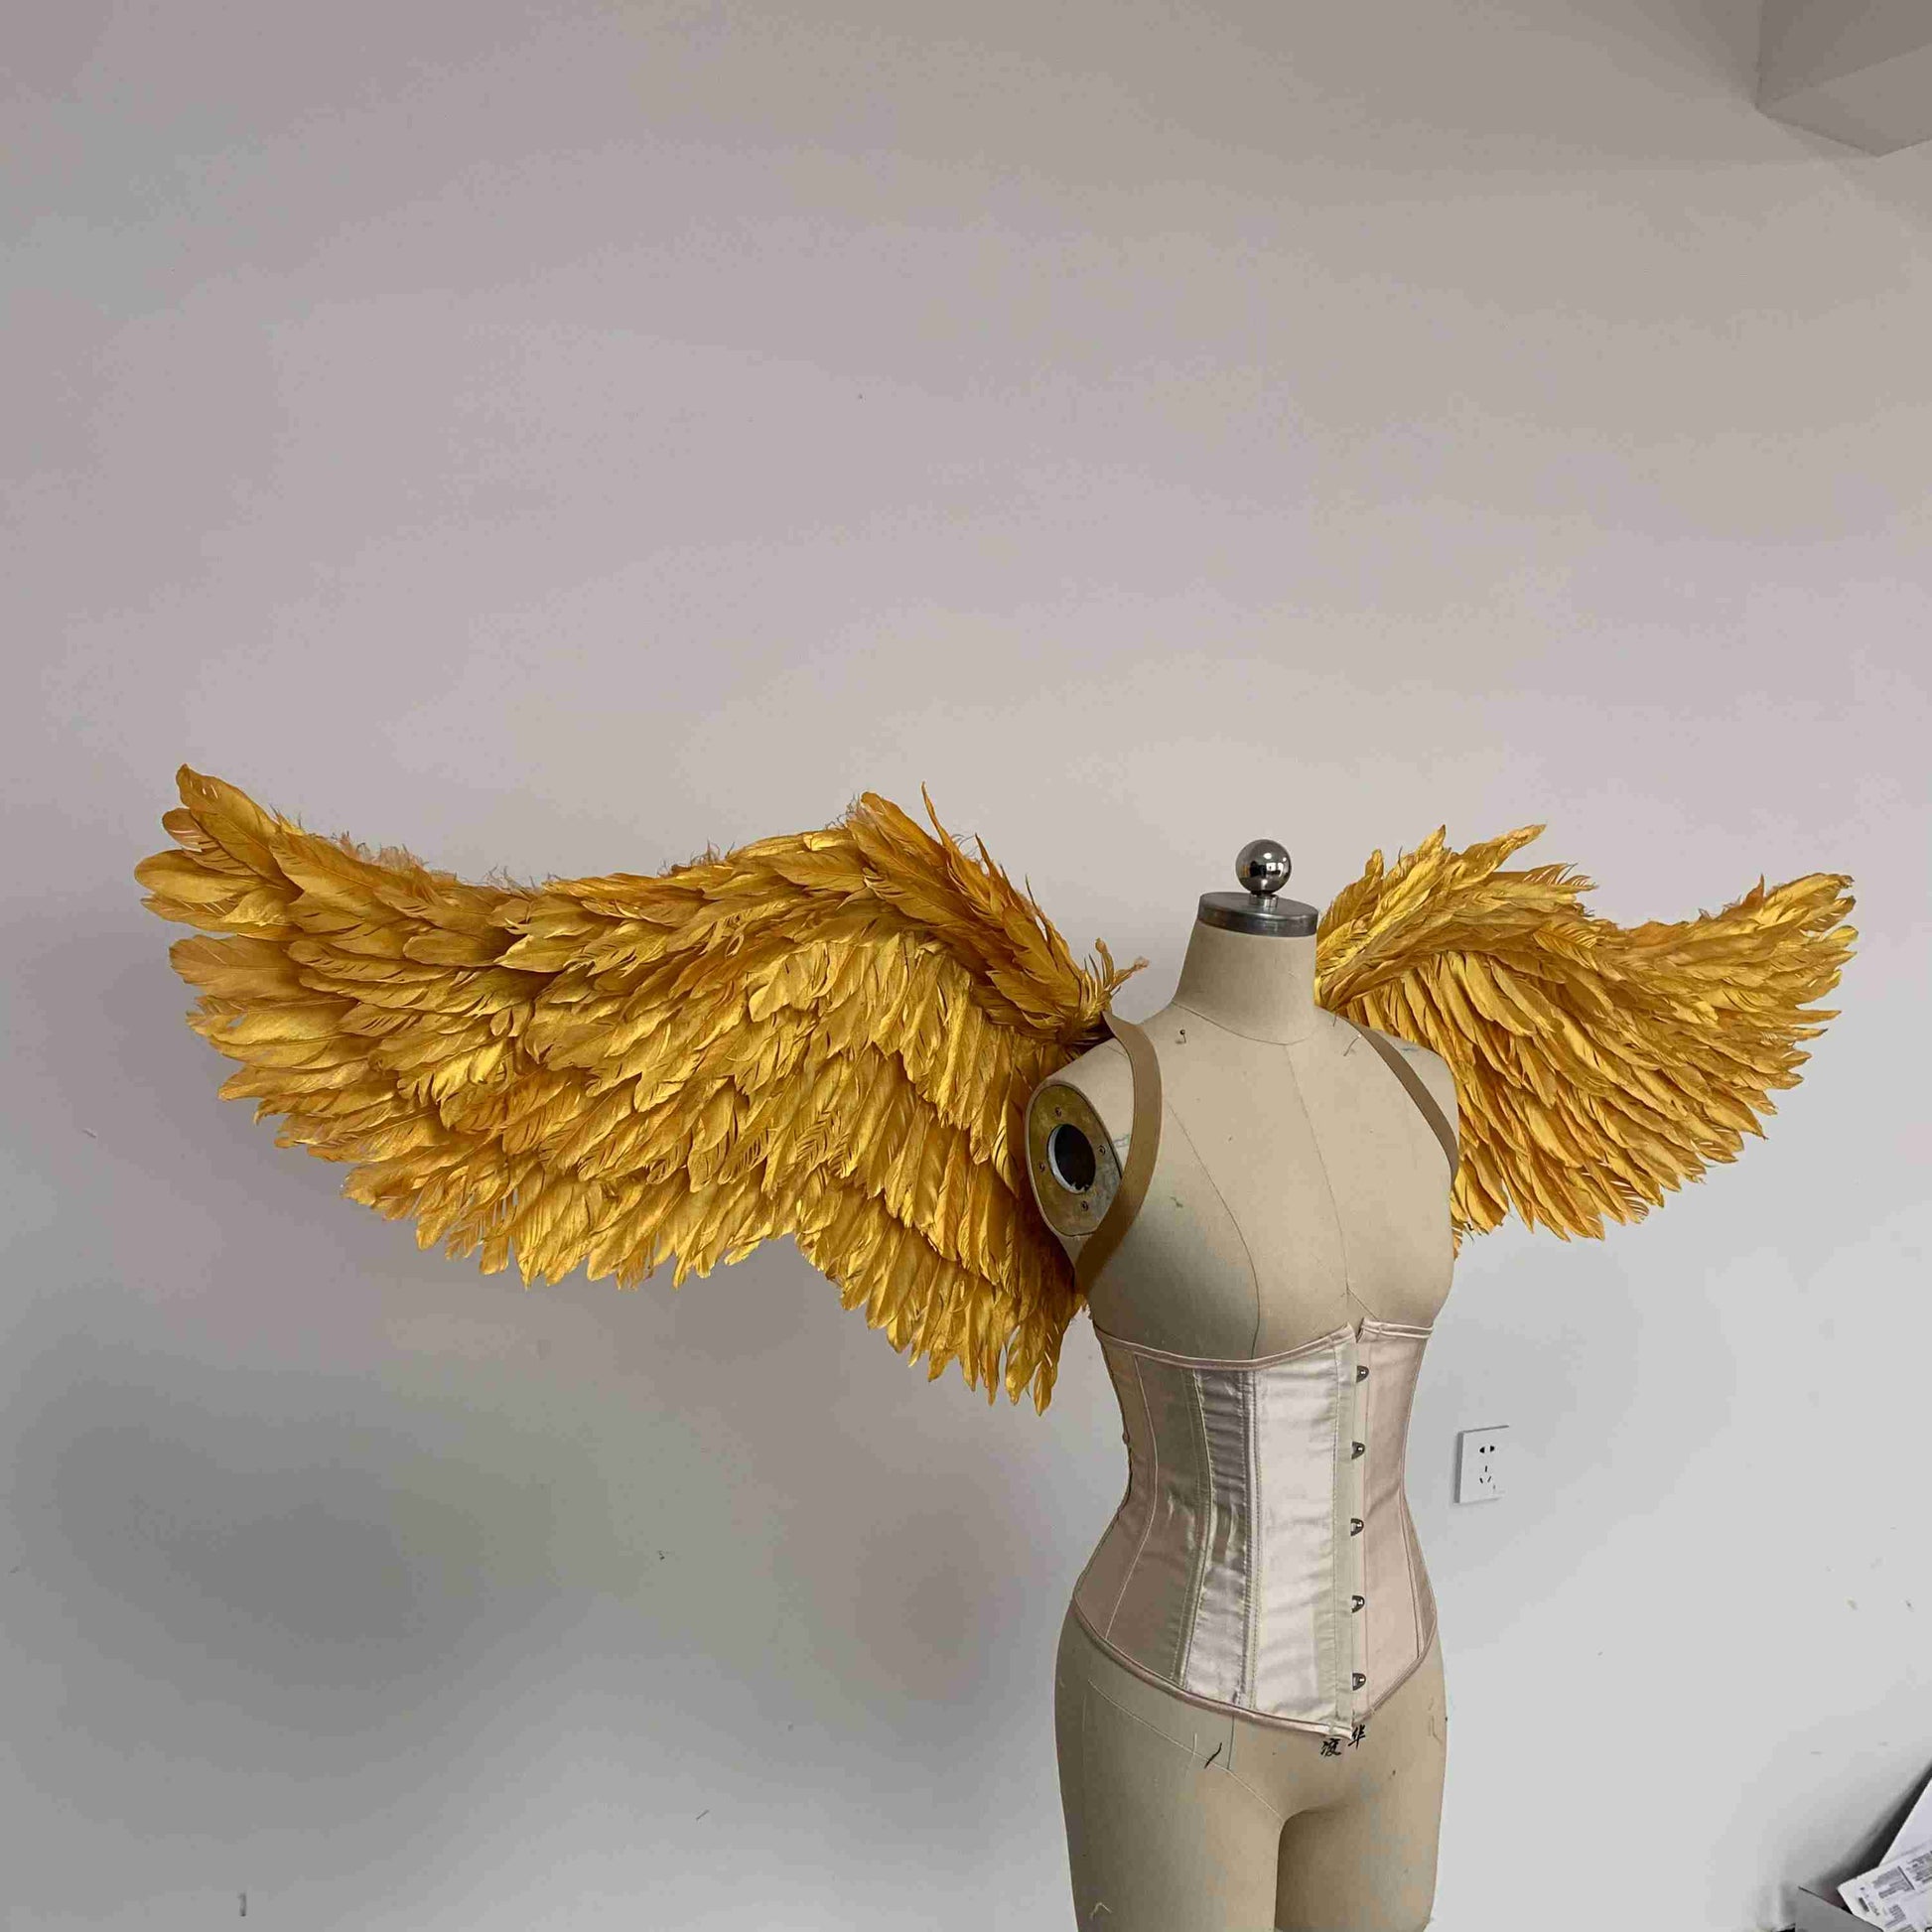 Our small golden angel wings from the right side. Made from goose feathers. Wings for angel costume. Suitable for photoshoots.